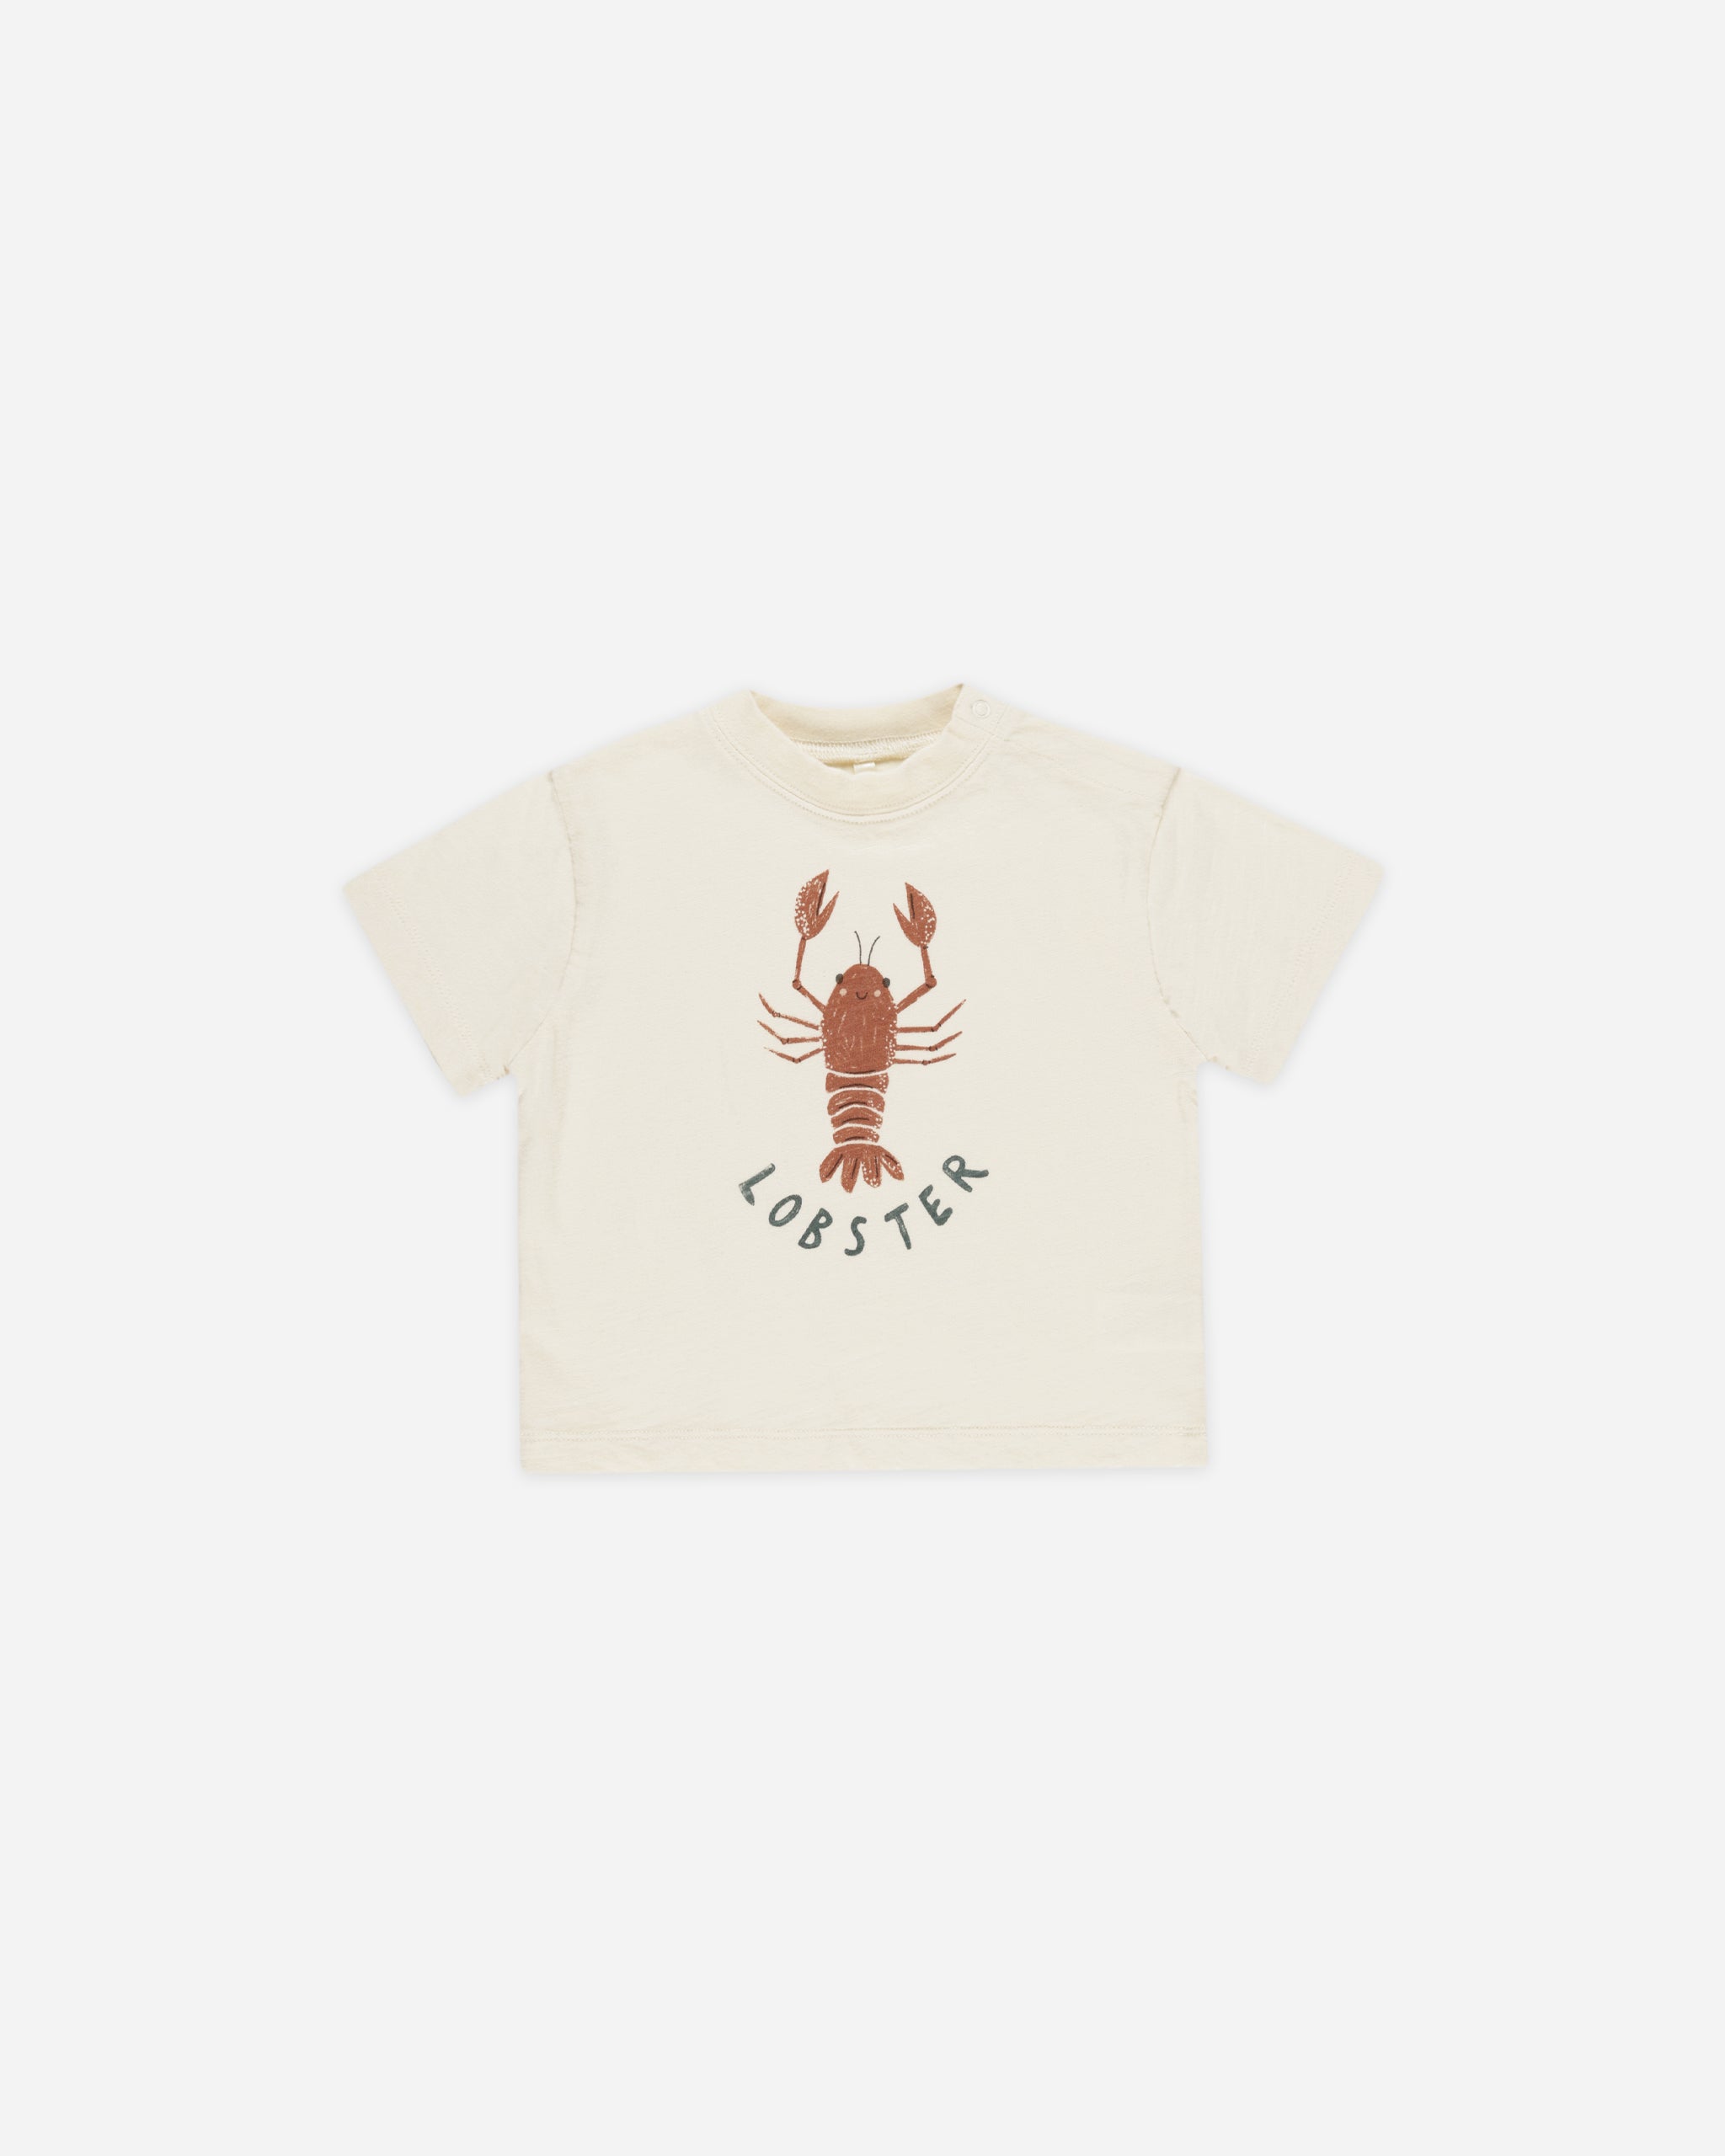 Relaxed Tee || Lobster - Rylee + Cru | Kids Clothes | Trendy Baby Clothes | Modern Infant Outfits |